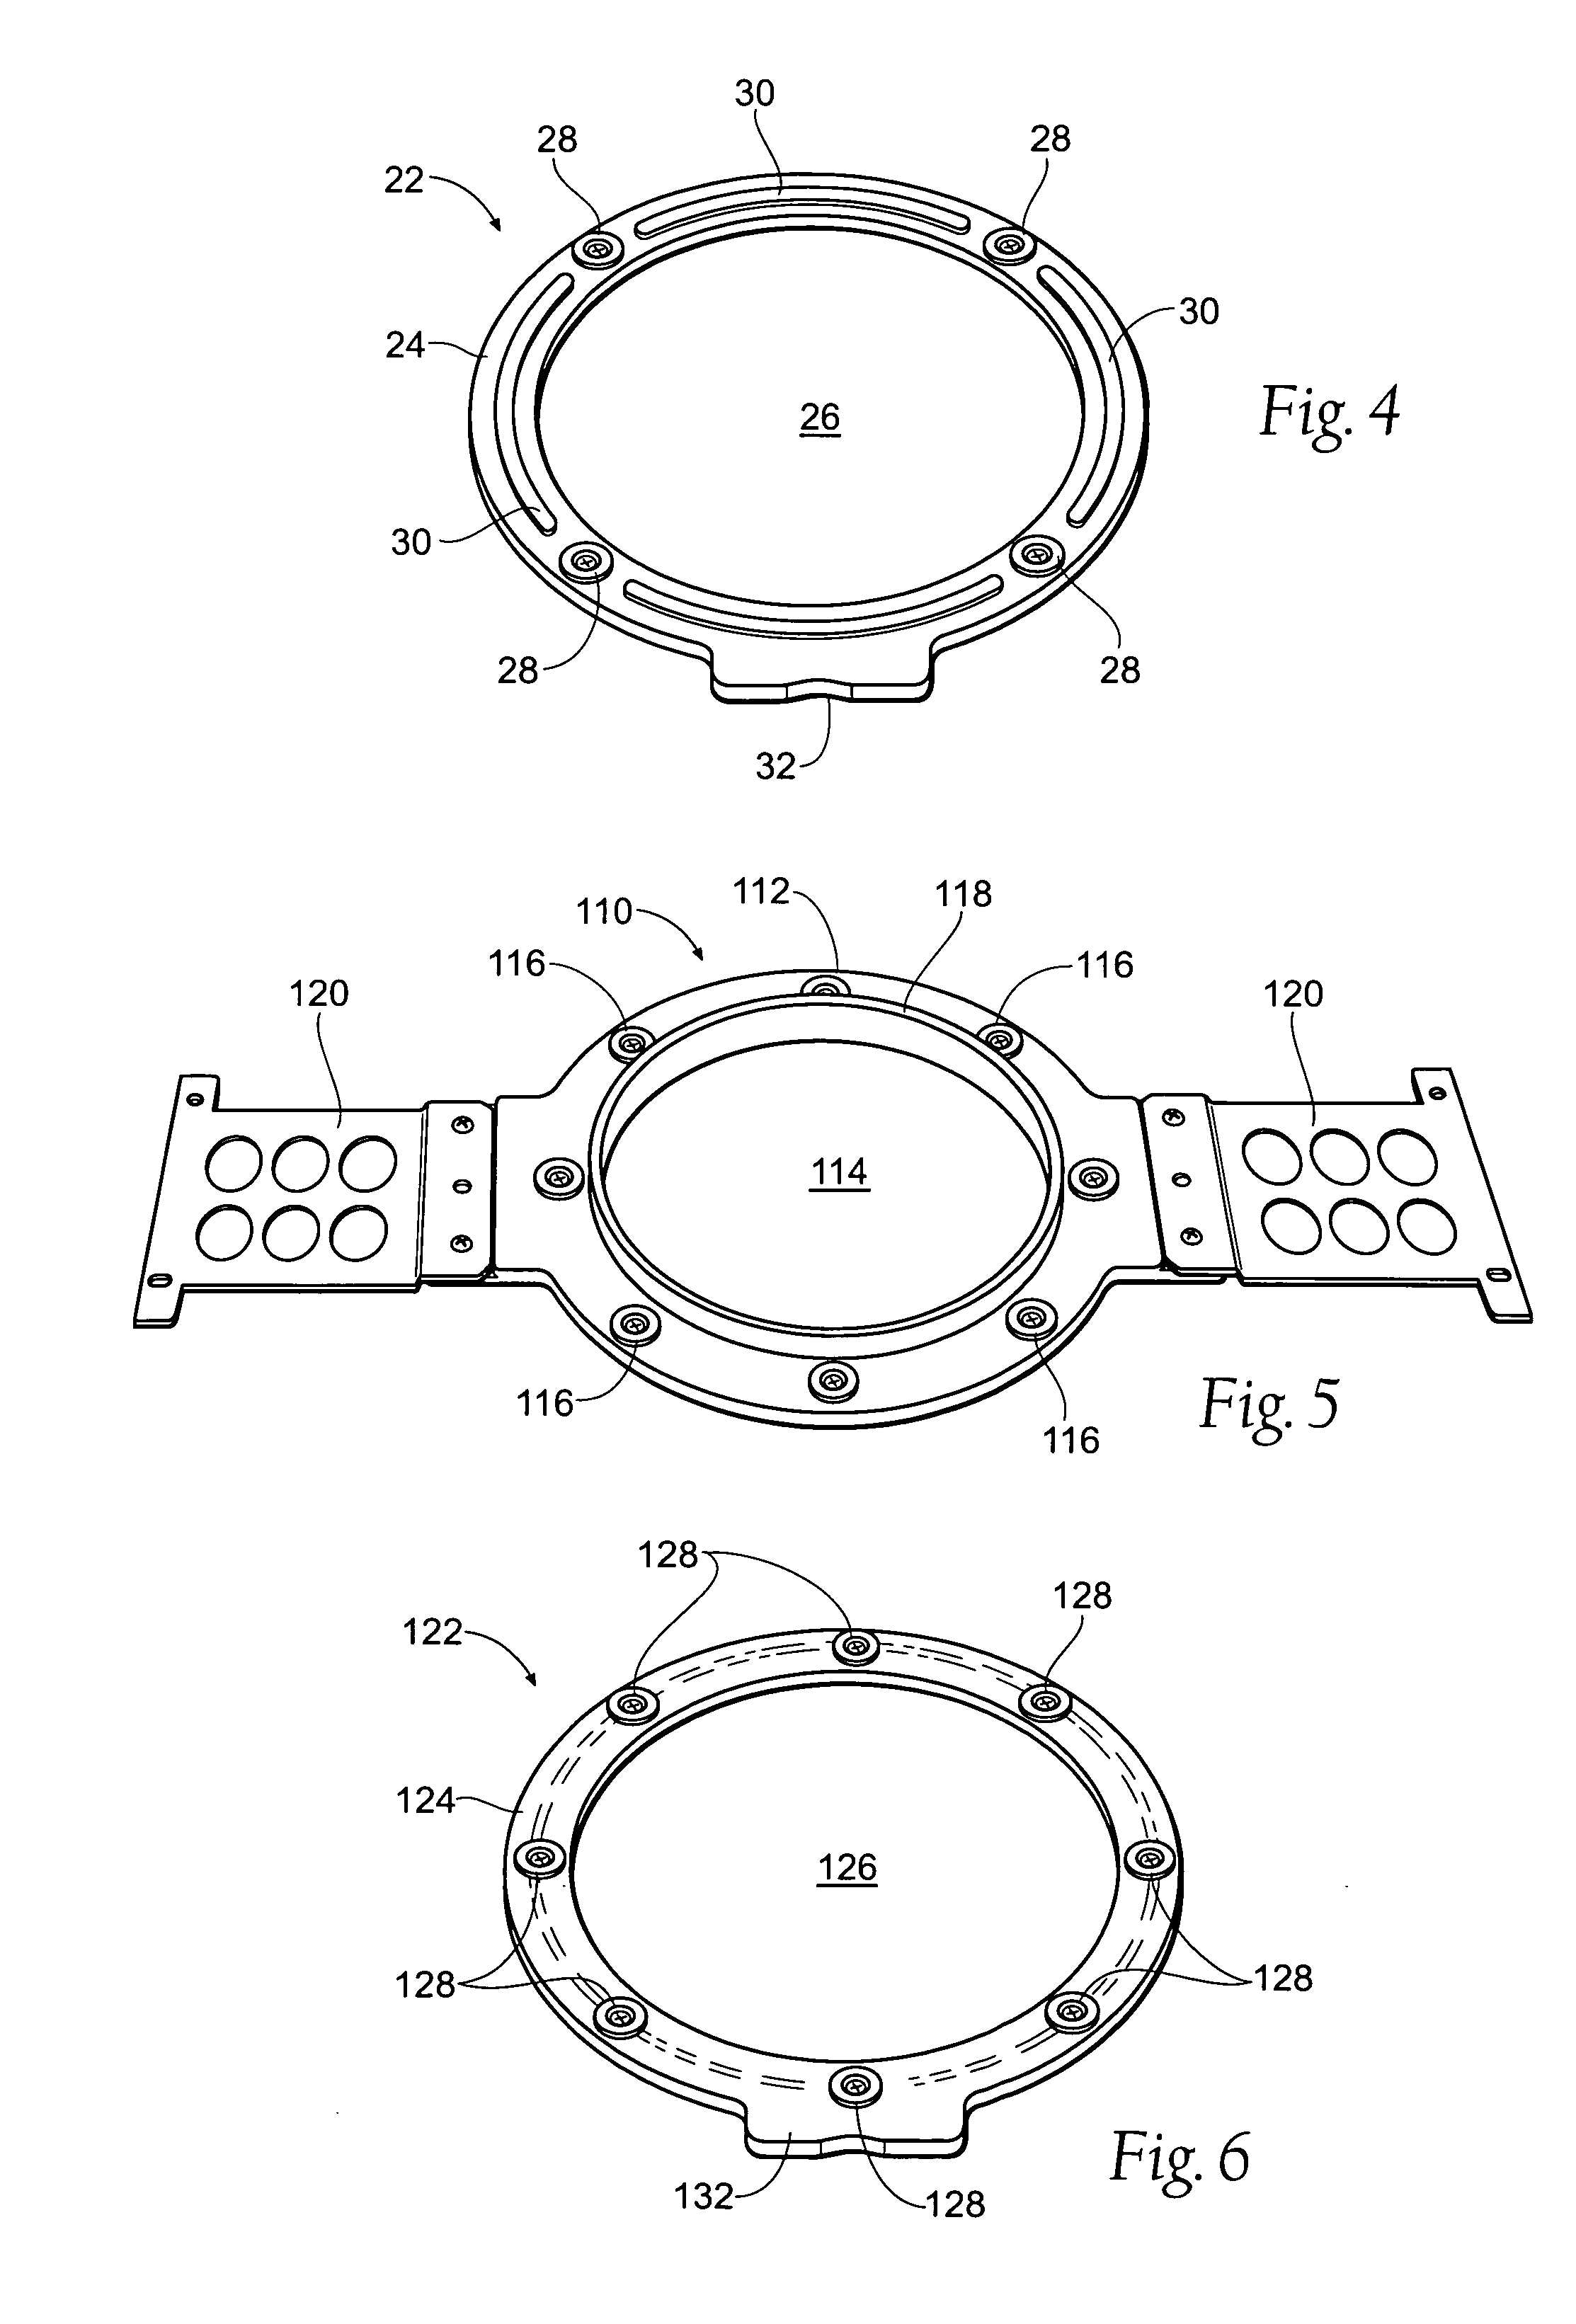 Magnetic fabric retaining device